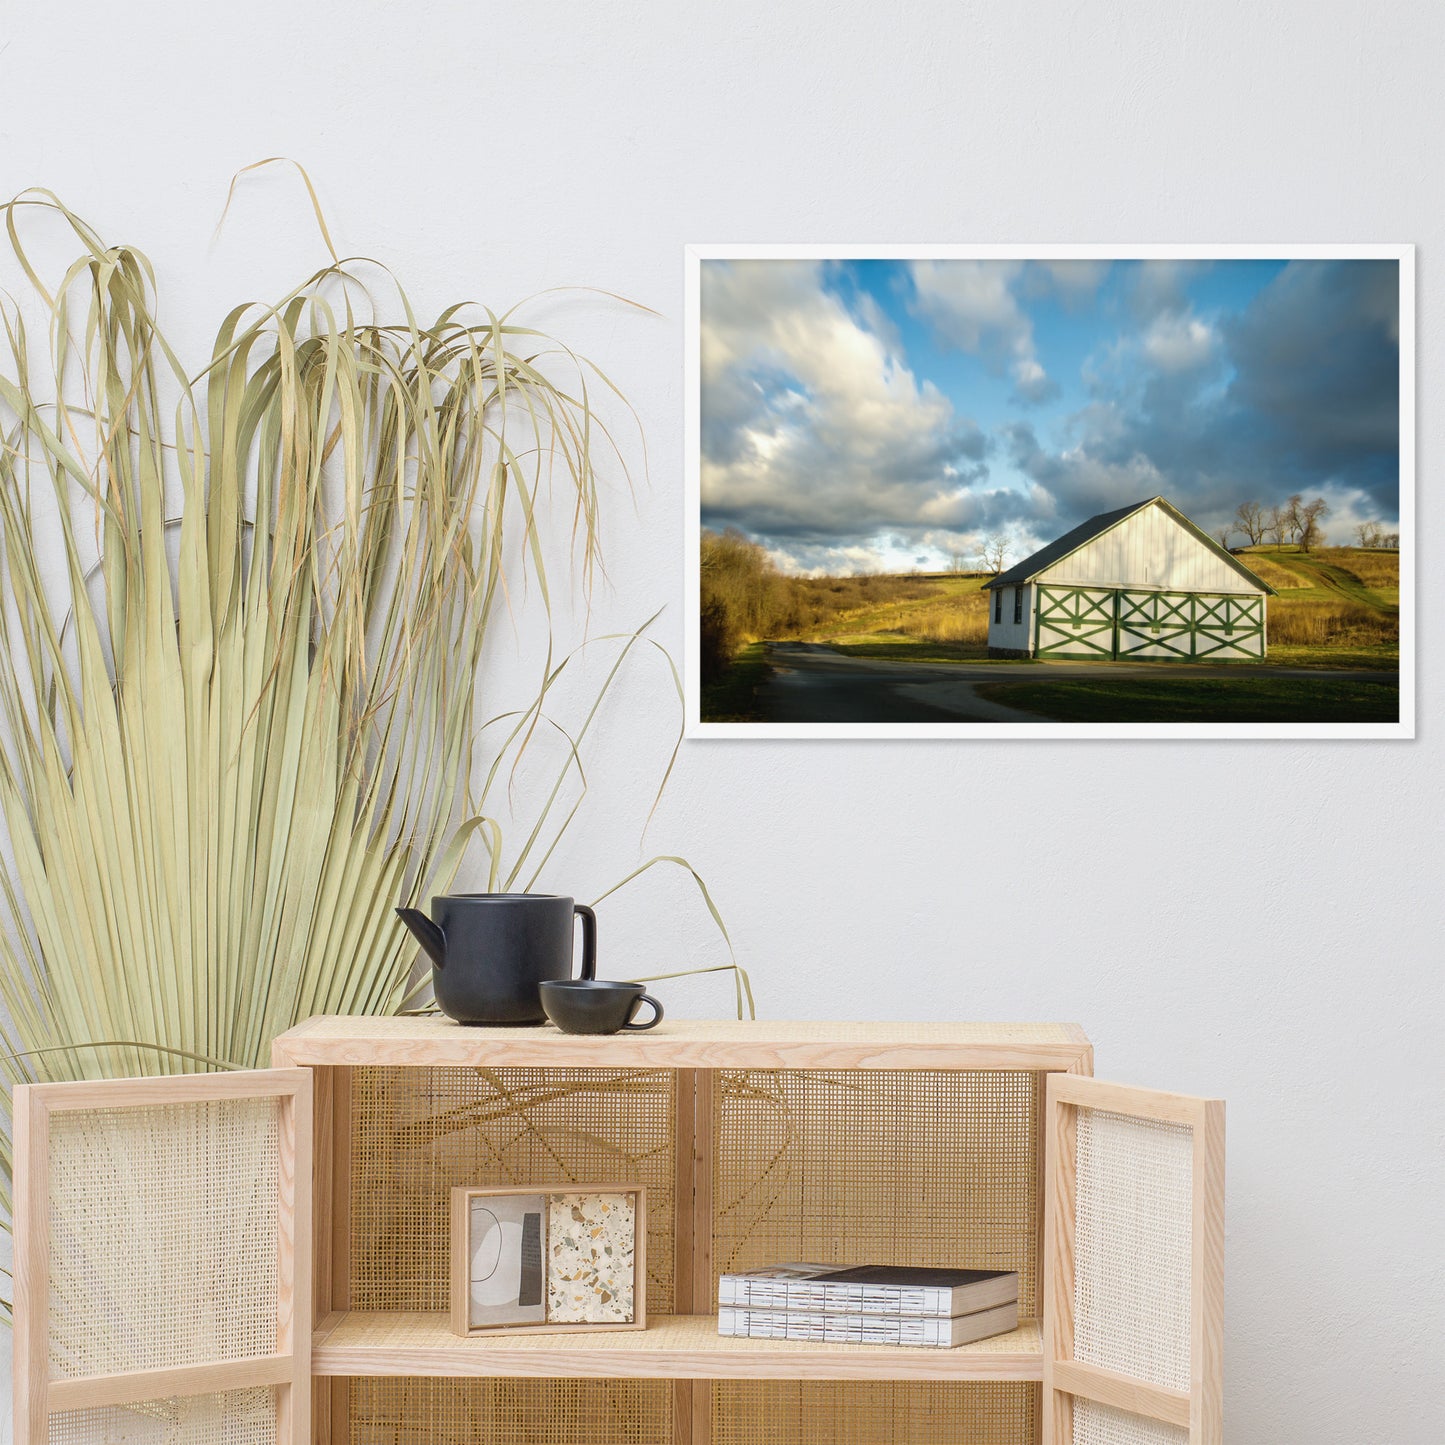 Pictures To Hang On Wall In Bedroom: Aging Barn in the Morning Sun - Rural / Country Style Landscape / Nature Photograph  Framed Wall Art Print - Wall Decor - Artwork